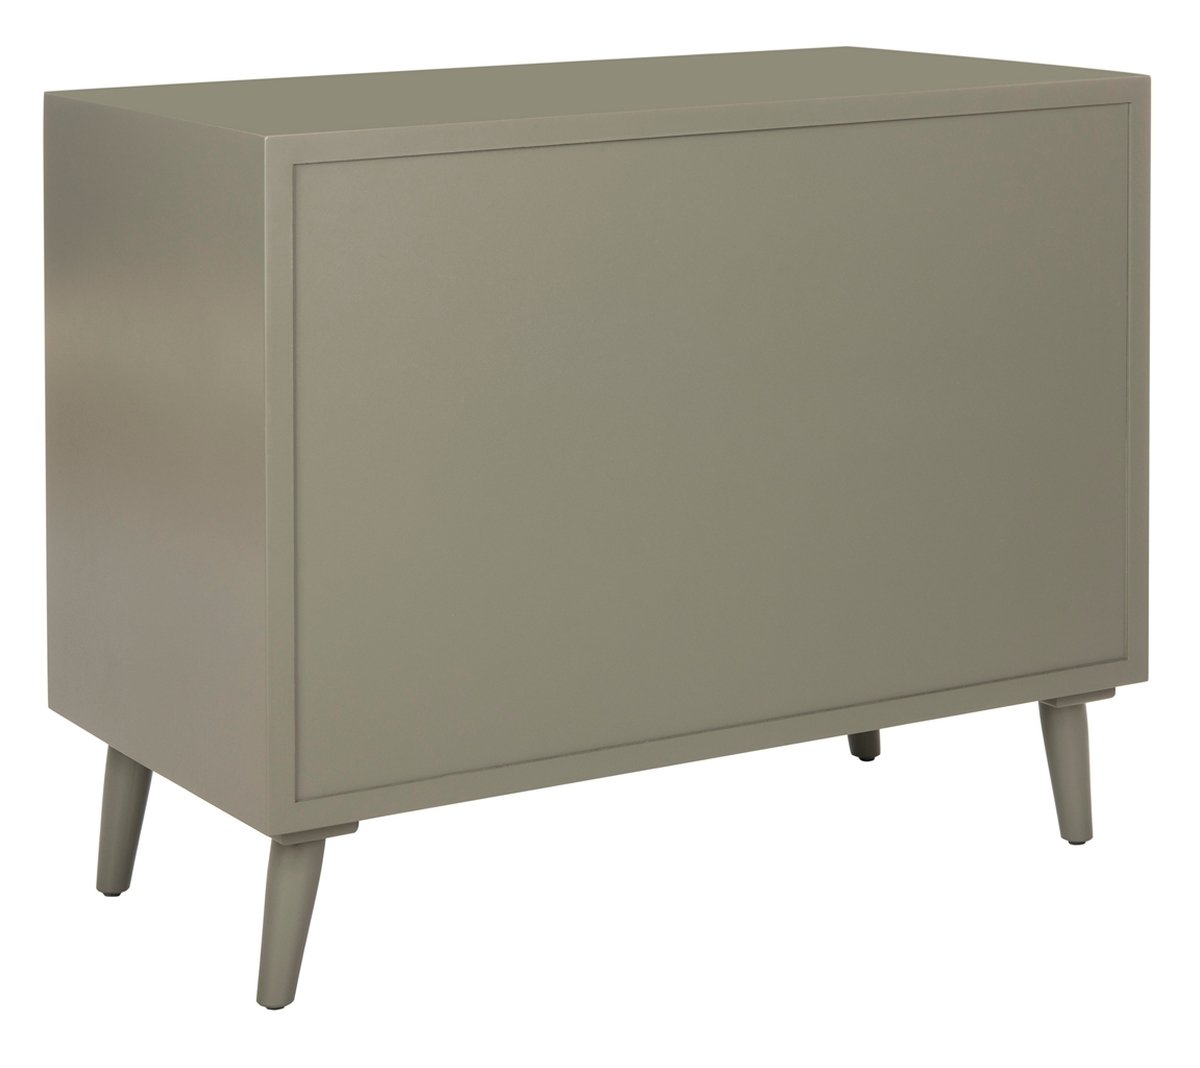 Blaize 3-Drawer Chest - Image 7